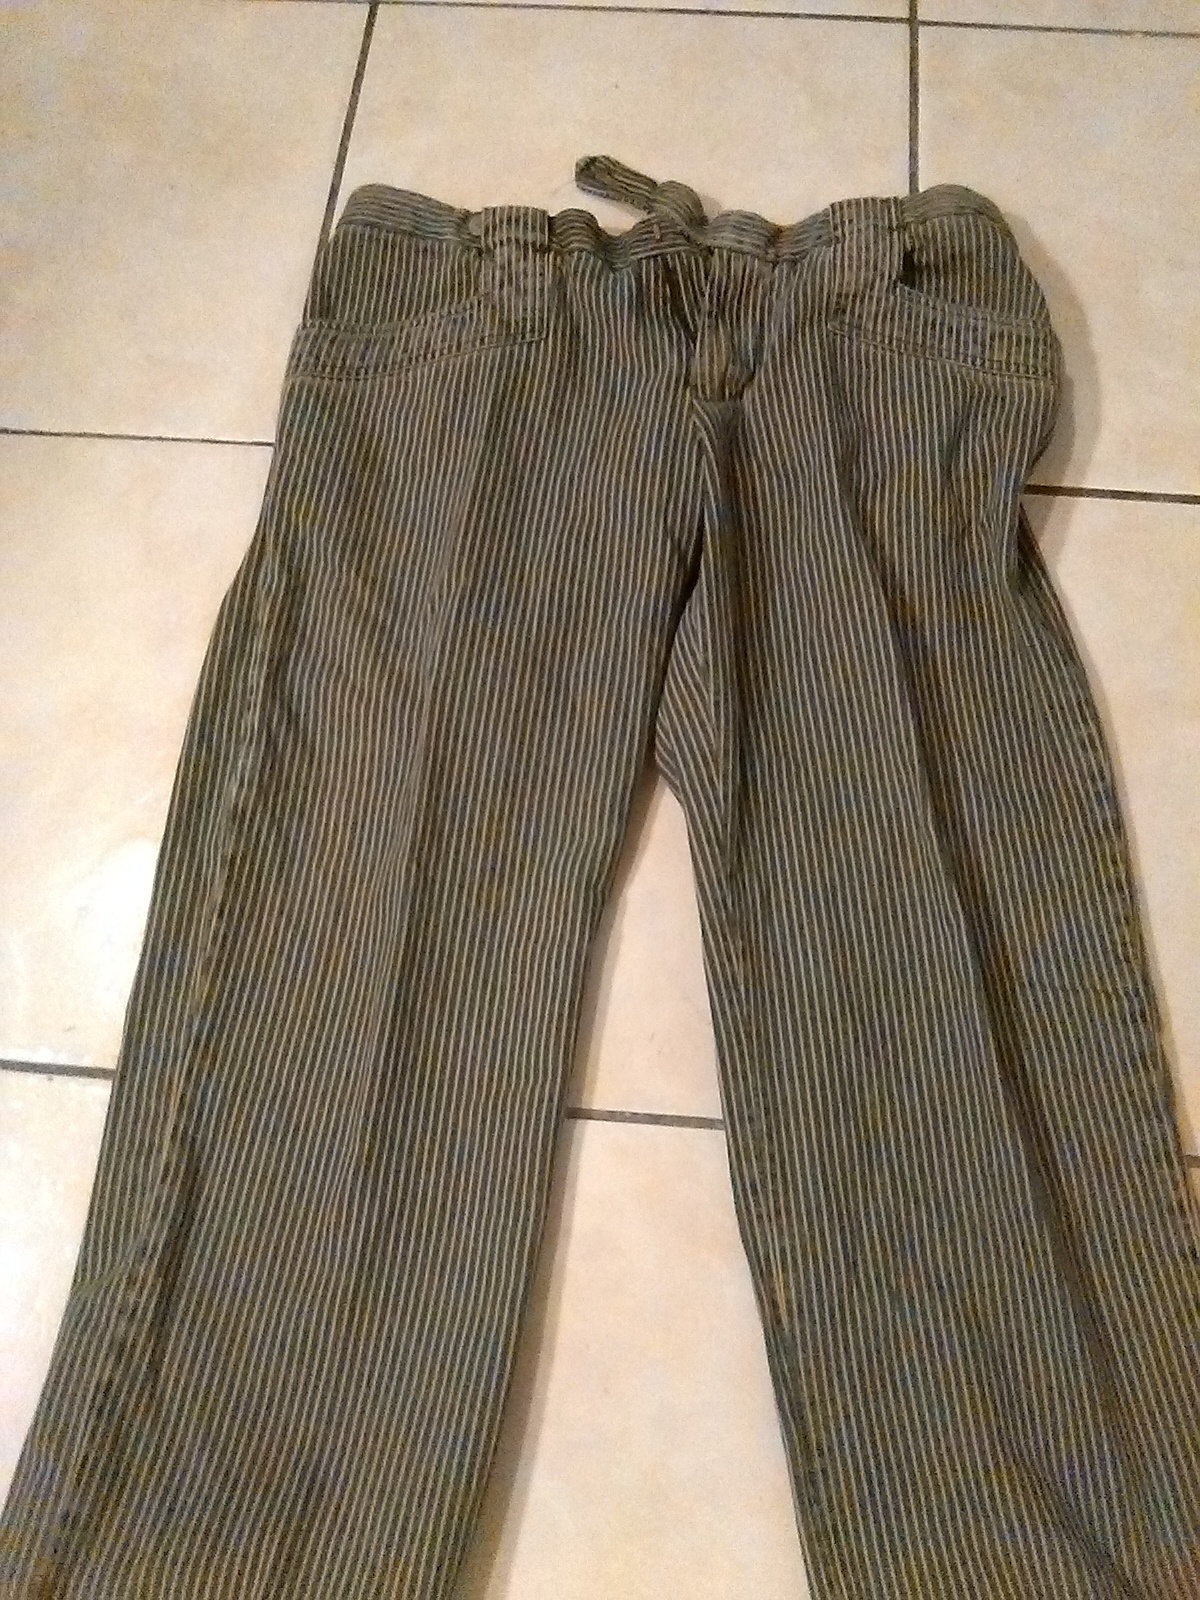 New Dolce And Gabbana Blue And Pink Striped Pants Size 38/52 - $15.00